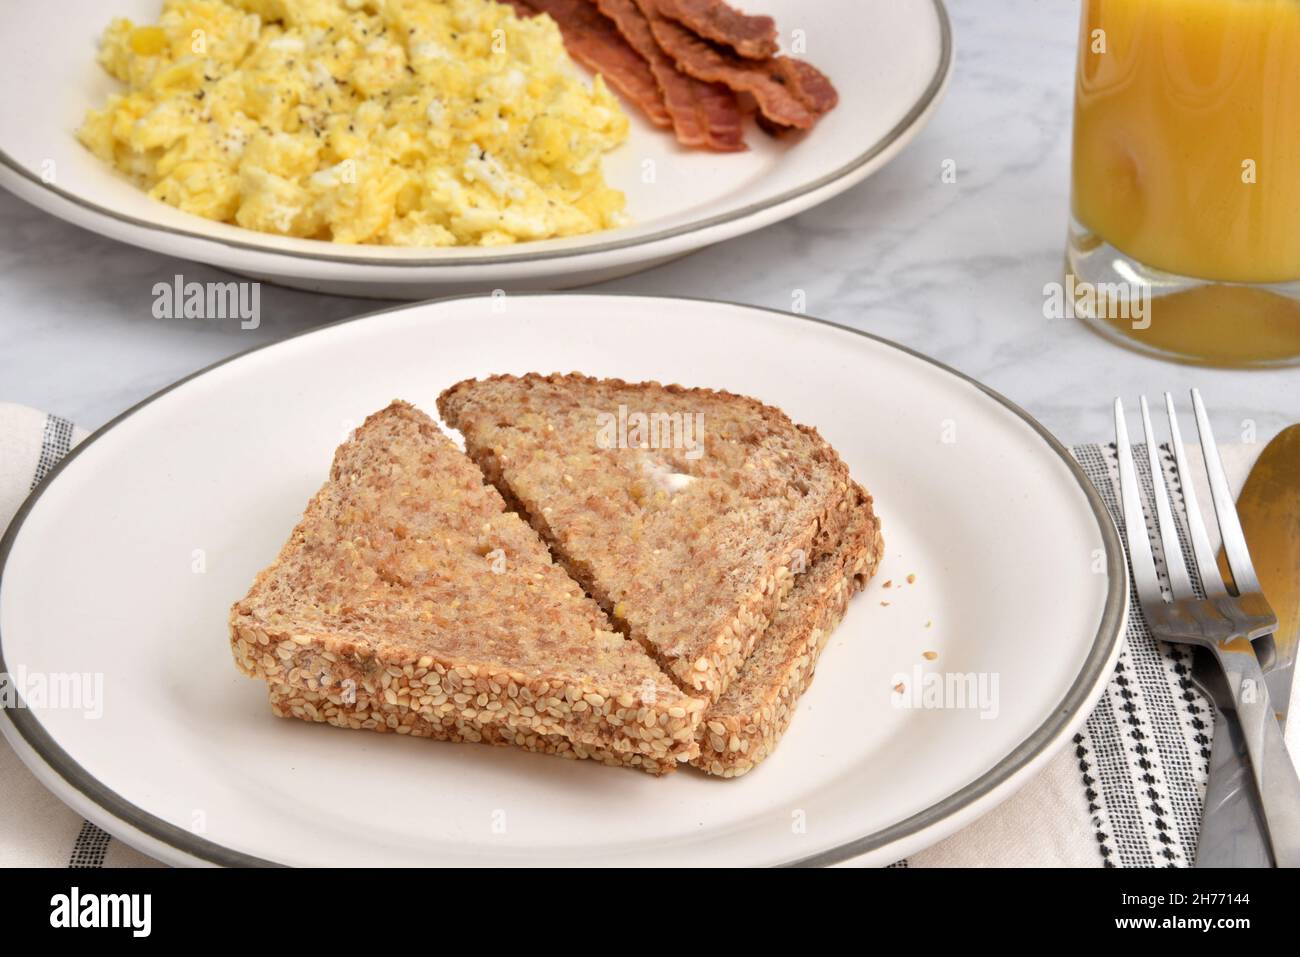 Hot buttered whole grain toast with sesame seeds and a bacon and egg breakfast Stock Photo